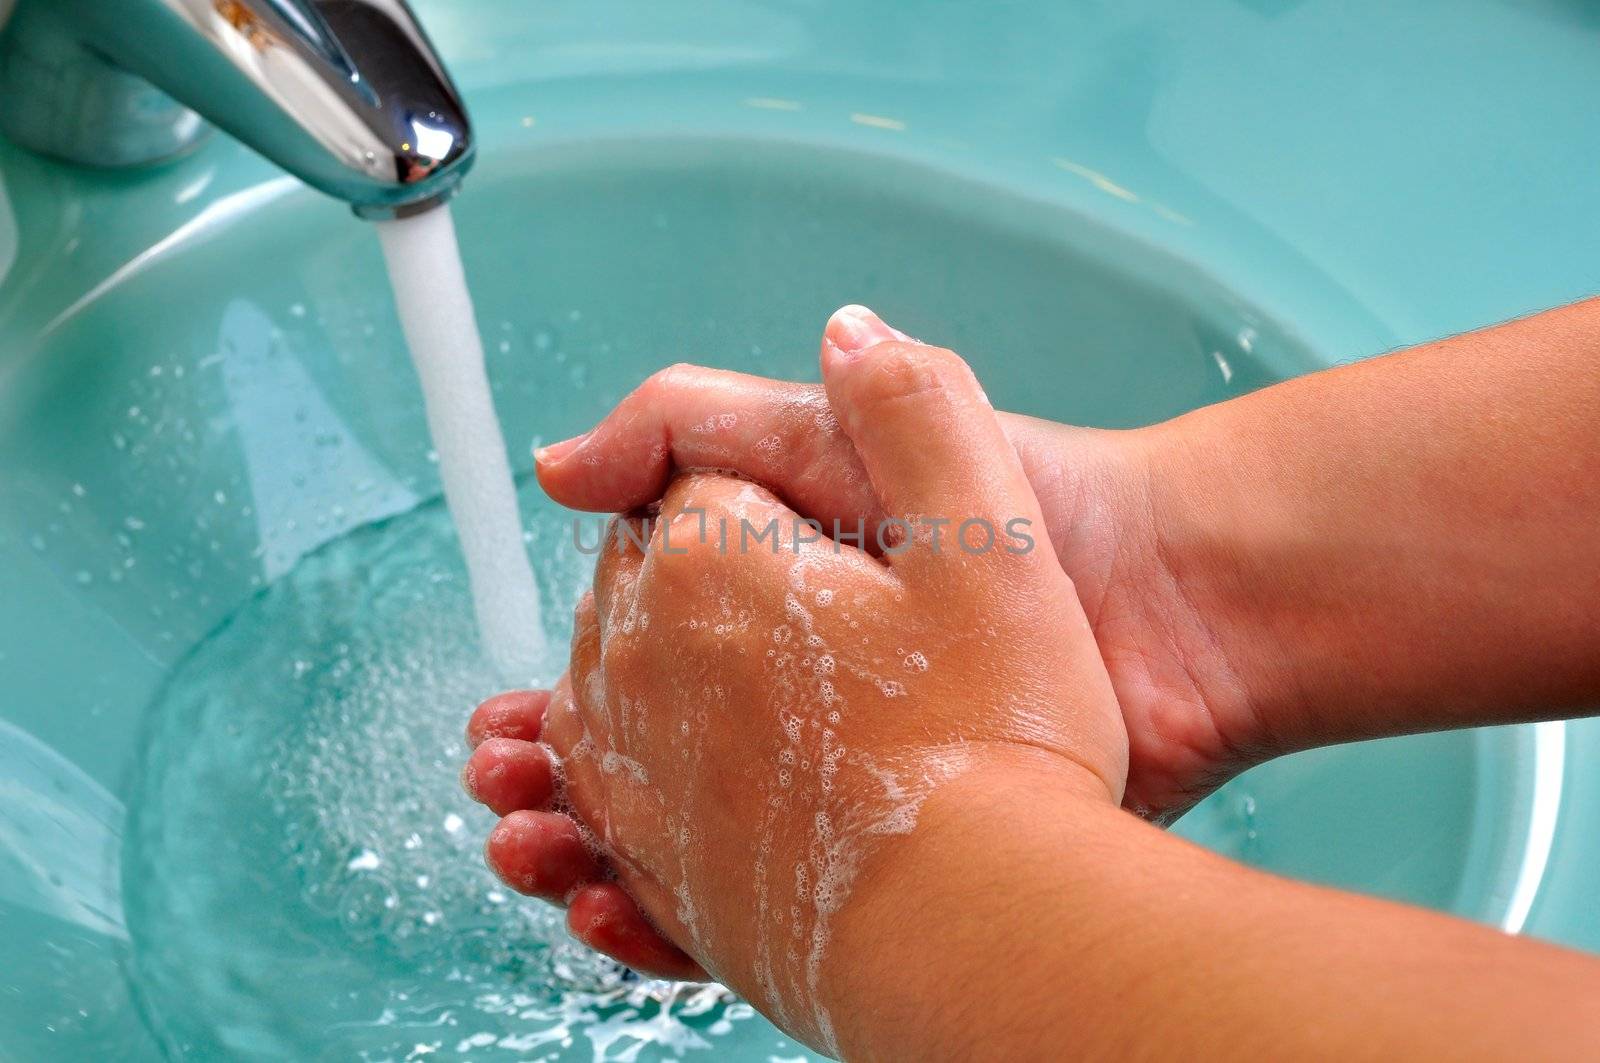 Hands being washed in a green sink